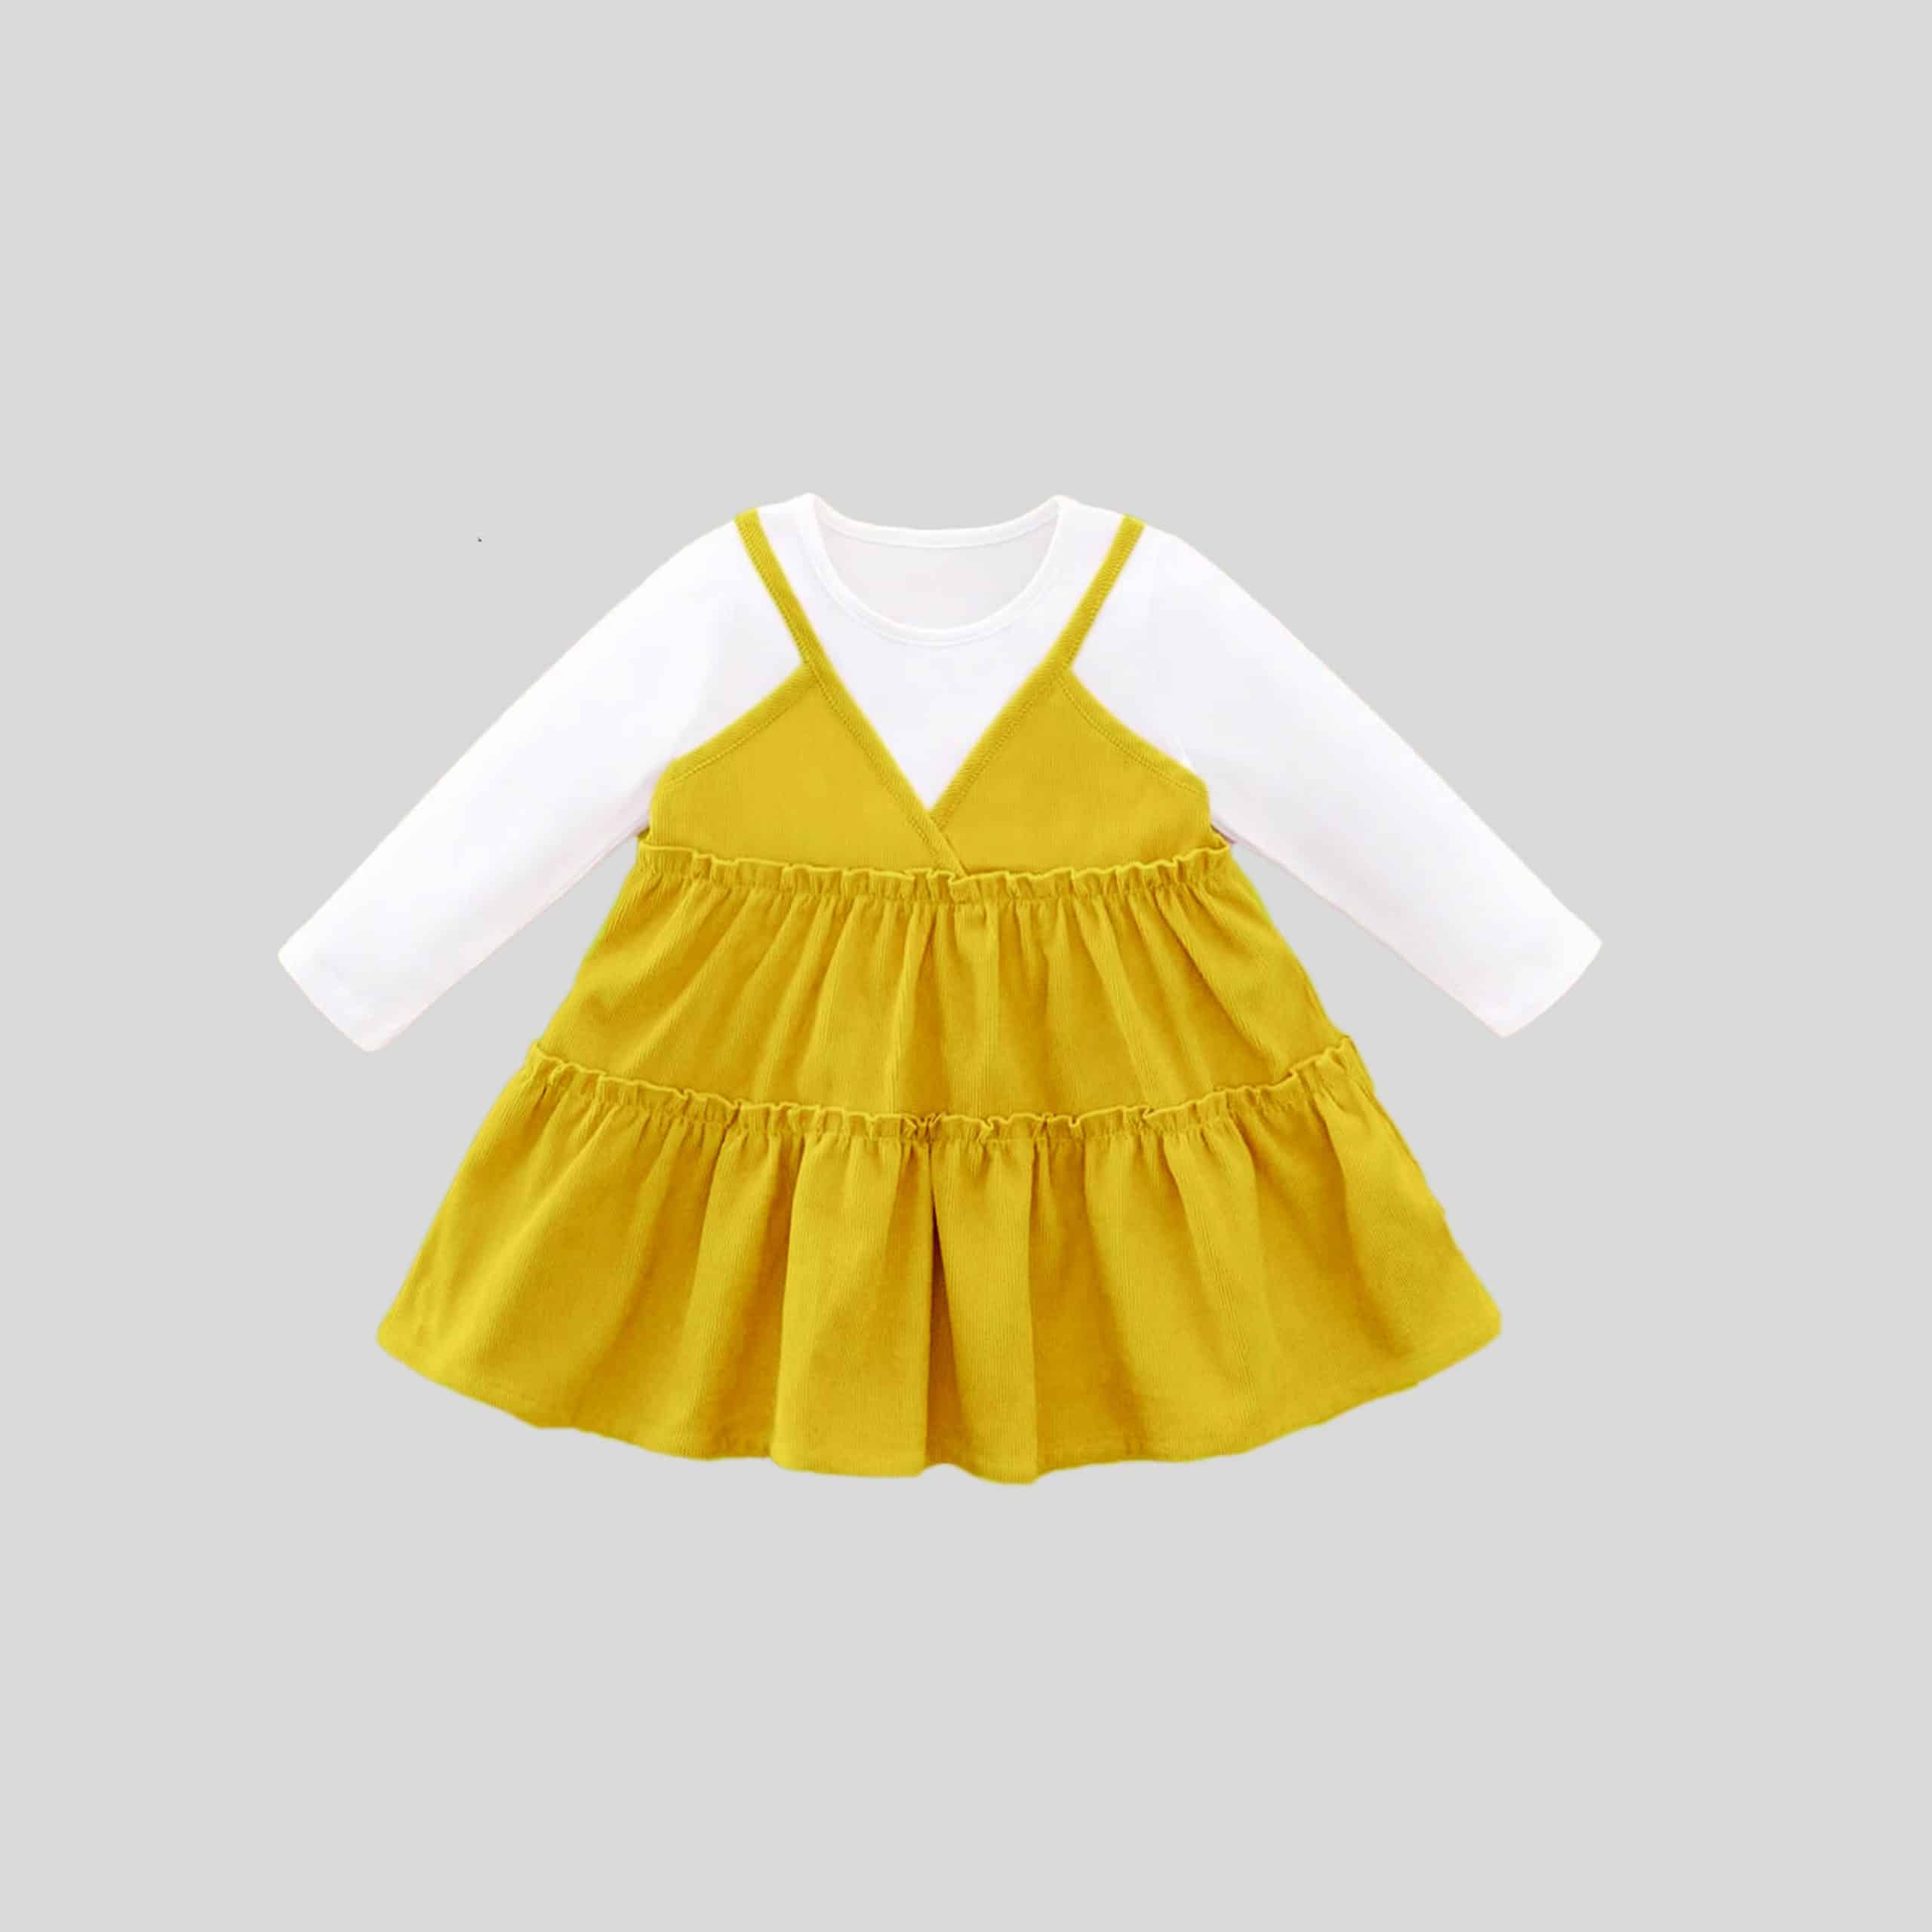 Girls full sleeves white top and yellow frilly Dungarees set-RKFCW254